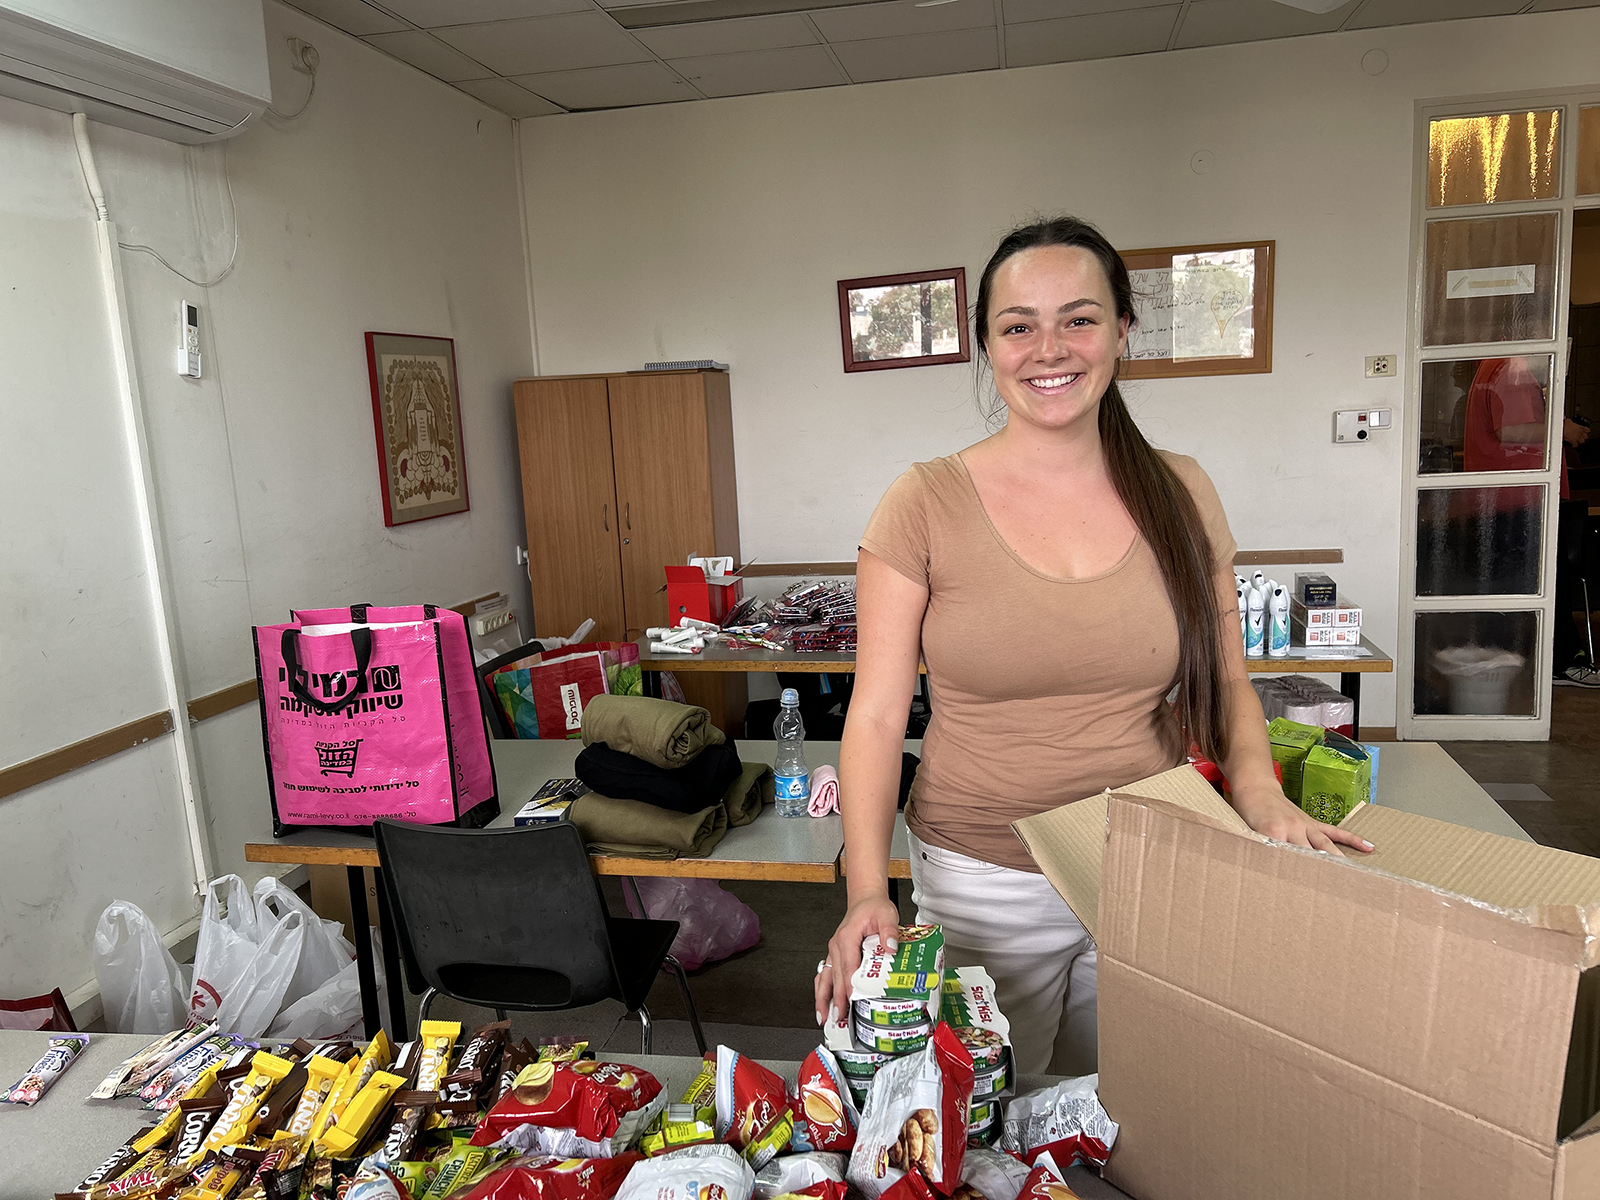 Samantha Cooper, a student at the Pardes Institute of Jewish Studies in Jerusalem, launched a student-run project to provide Israeli soldiers and Bedouin families in southern Israel with food and other essentials during wartime. Photo by Michele Chabin